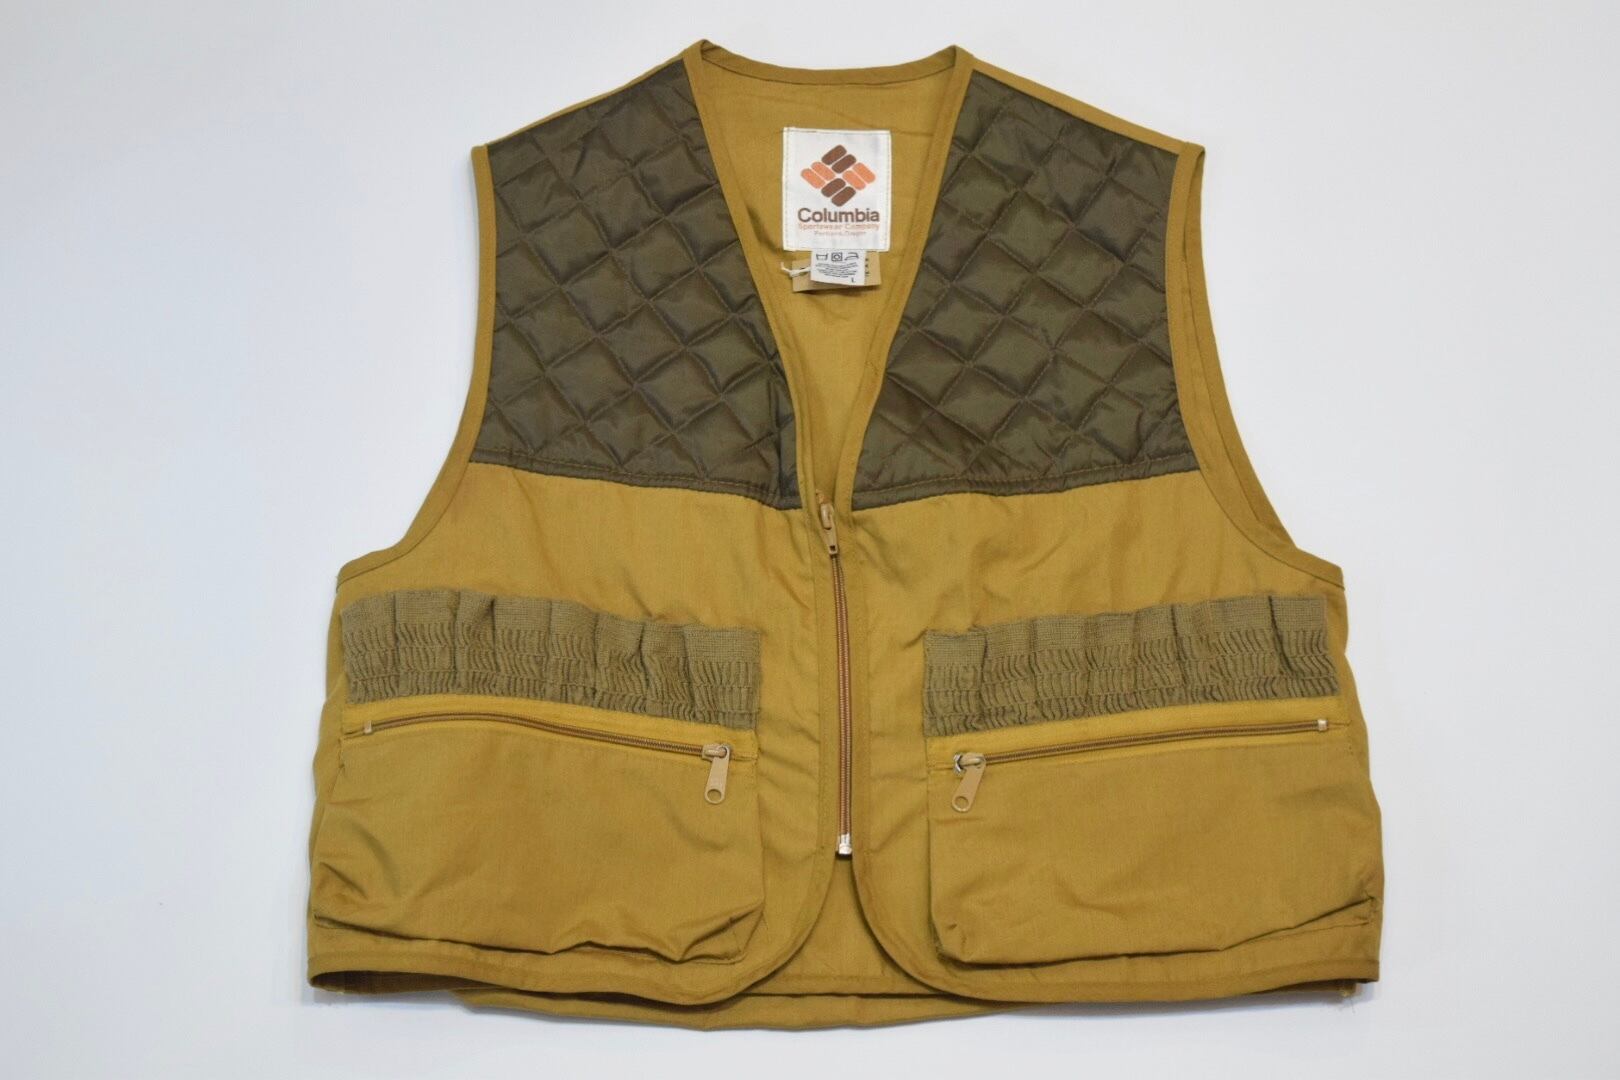 USED 80s Columbia Hunting Vest -Large 01149